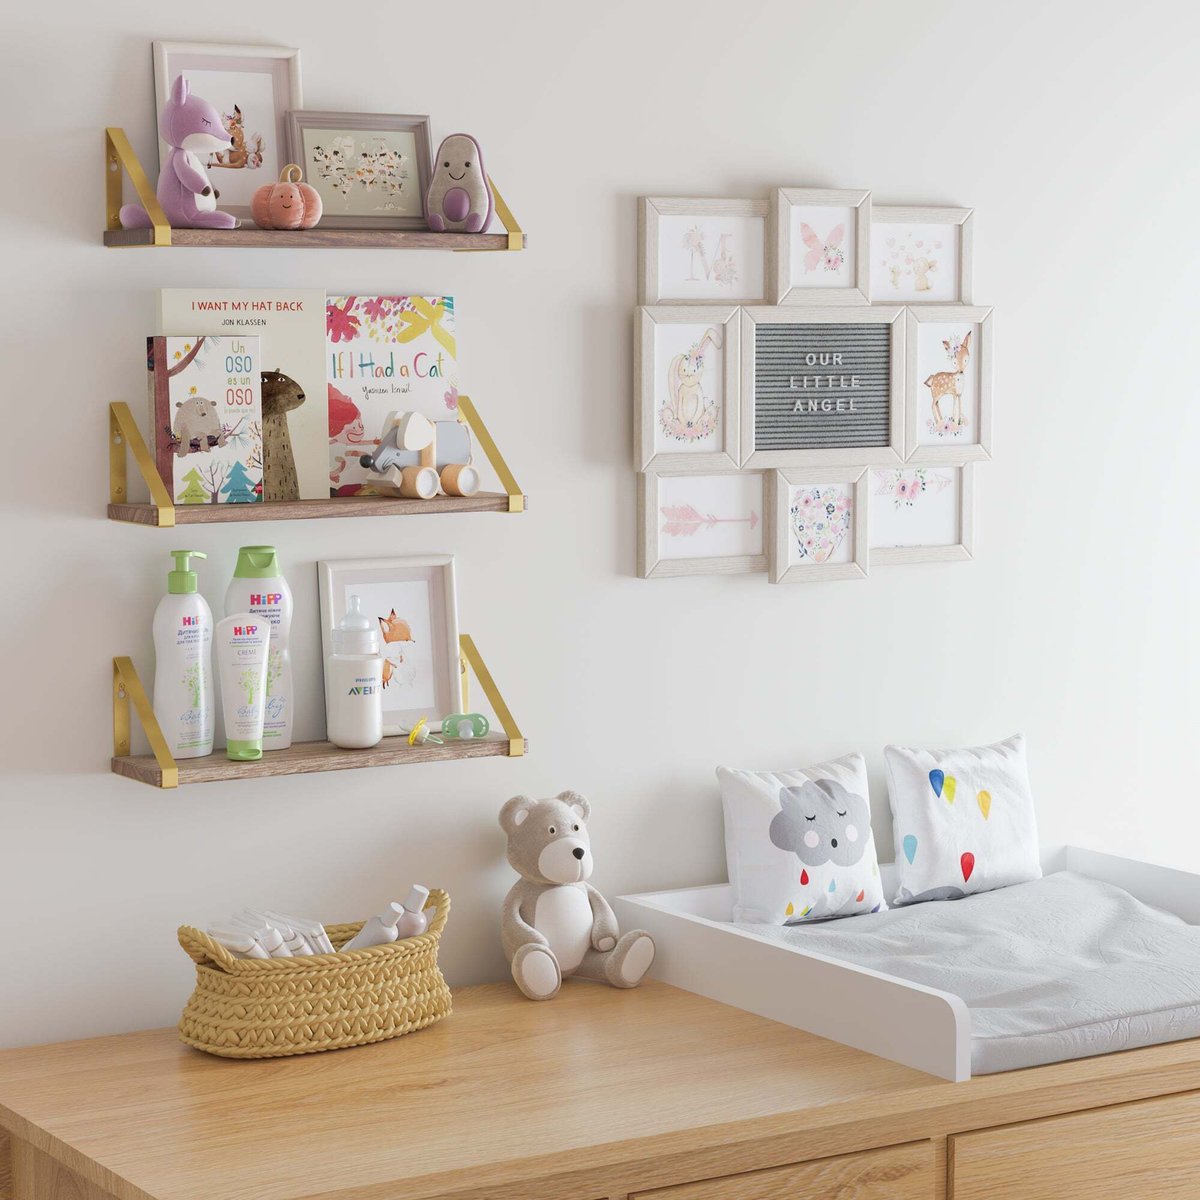 Instead of bulky bookcases, use Ponza wall shelves for nursery organization and storage to neatly display and organize your favorite books, picture frames, baby essentials and more!
Check out wallniture.com/products/ponza… 
#floatingshelves #walldecor #nurseryorganization #homebeautiful